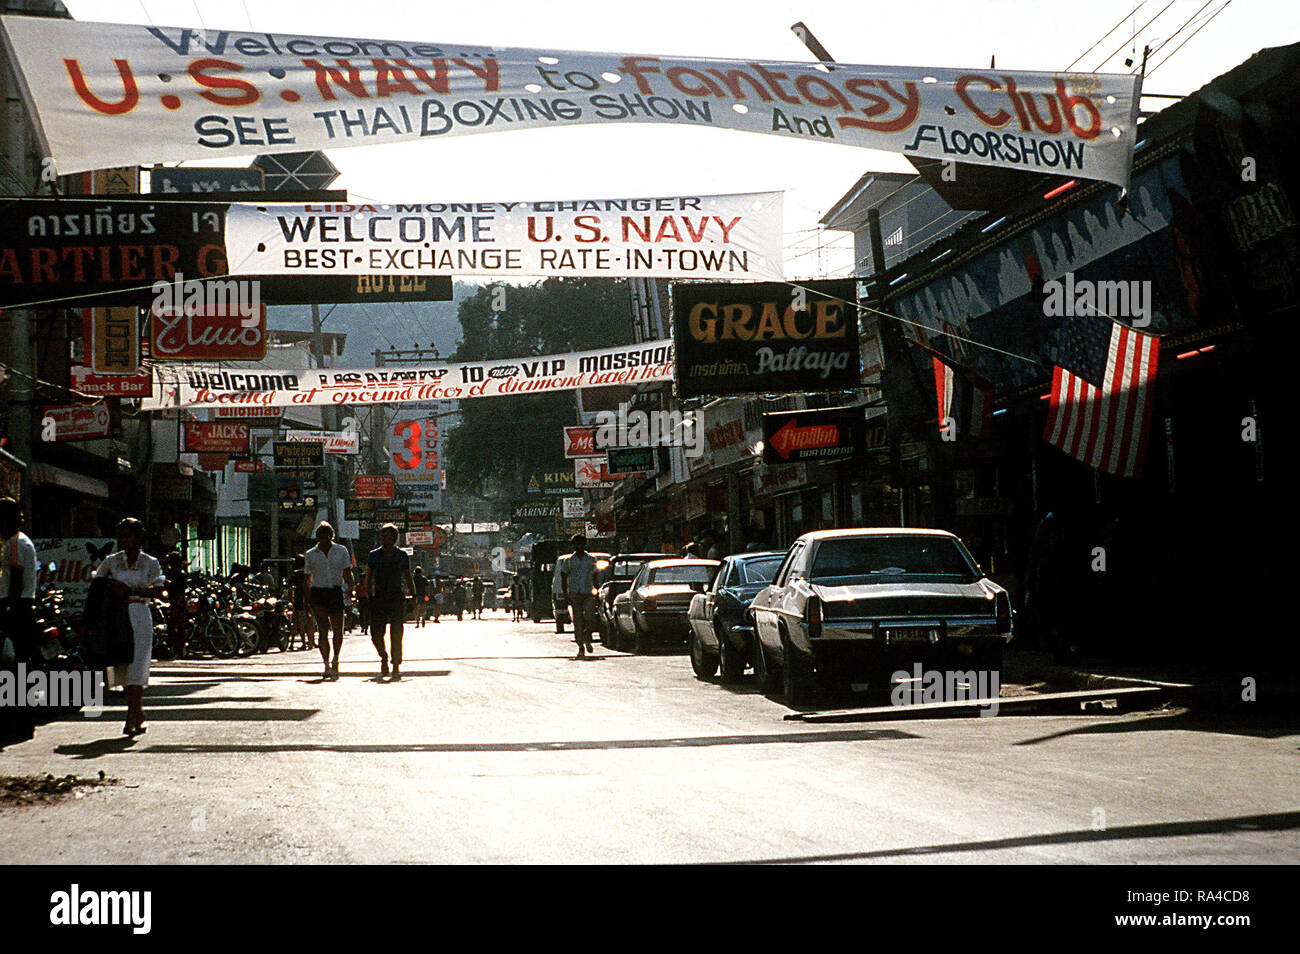 1983 - Banners welcoming 7th Fleet sailors hang across a downtown street in Thailand Stock Photo